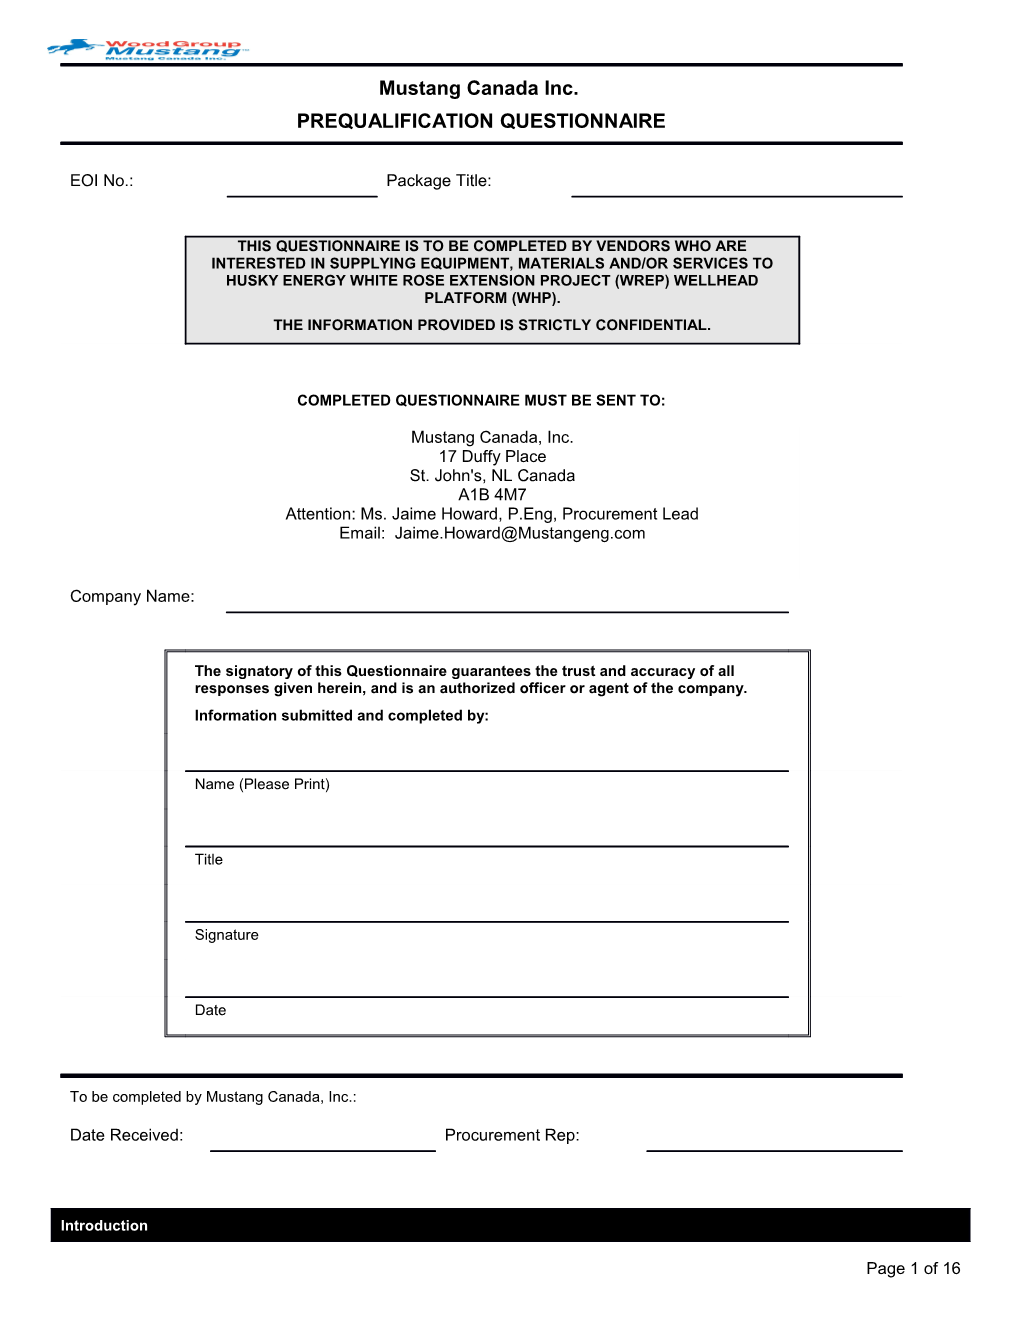 EOI-101414-106-Mustang Canada Inc. Supplier Pre-Qualification Questionnaire (DRILLING)